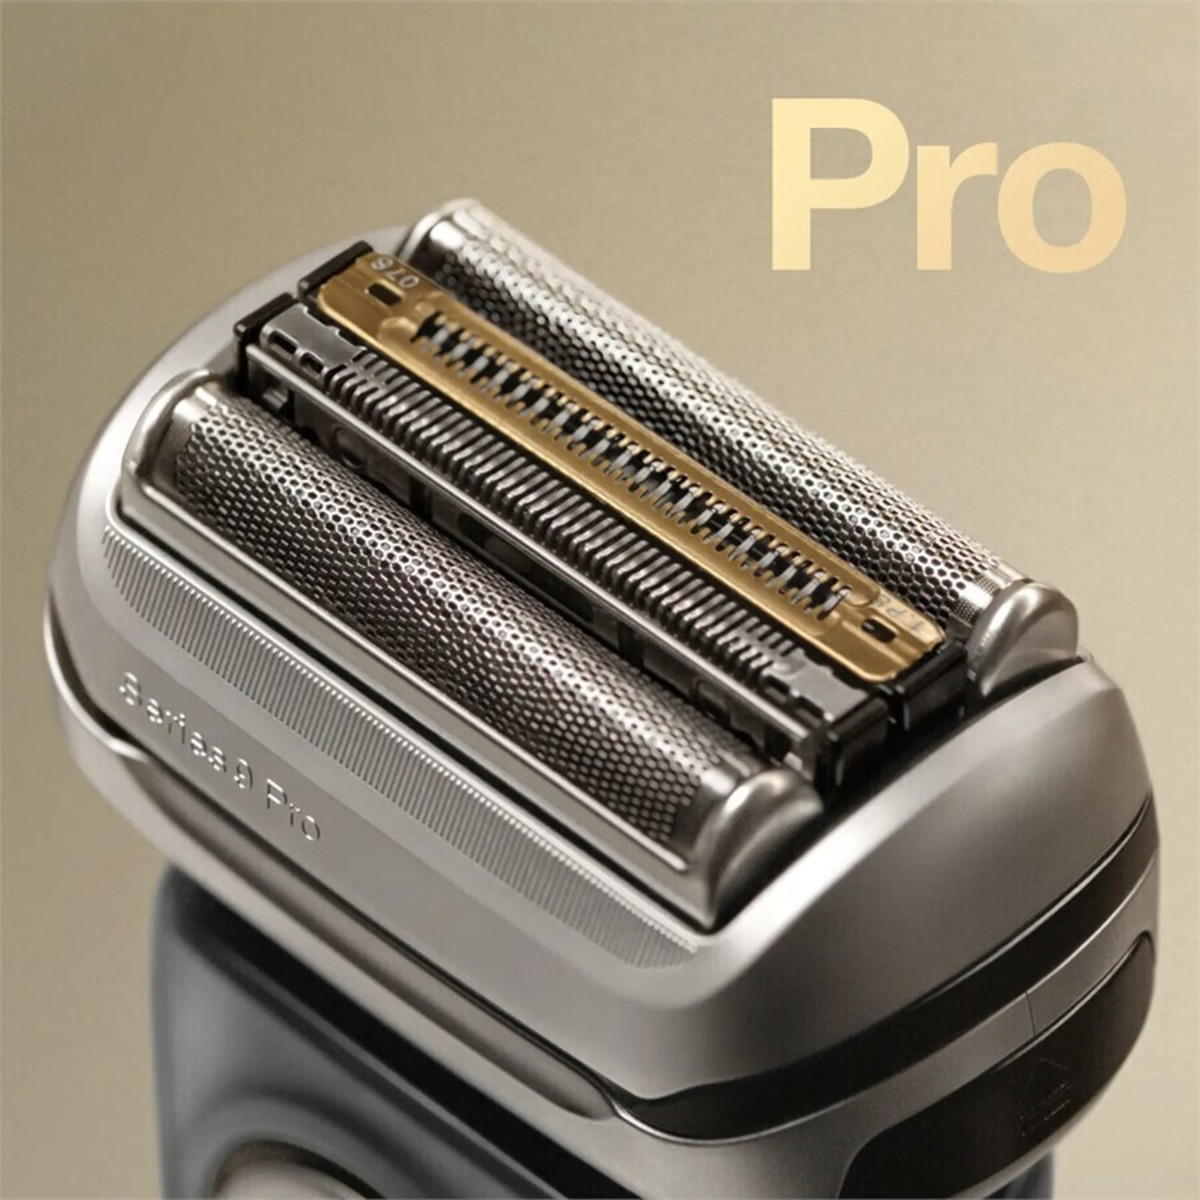 The Braun Series 9 Pro Electric Razor: A Top Choice for a Smooth Shave